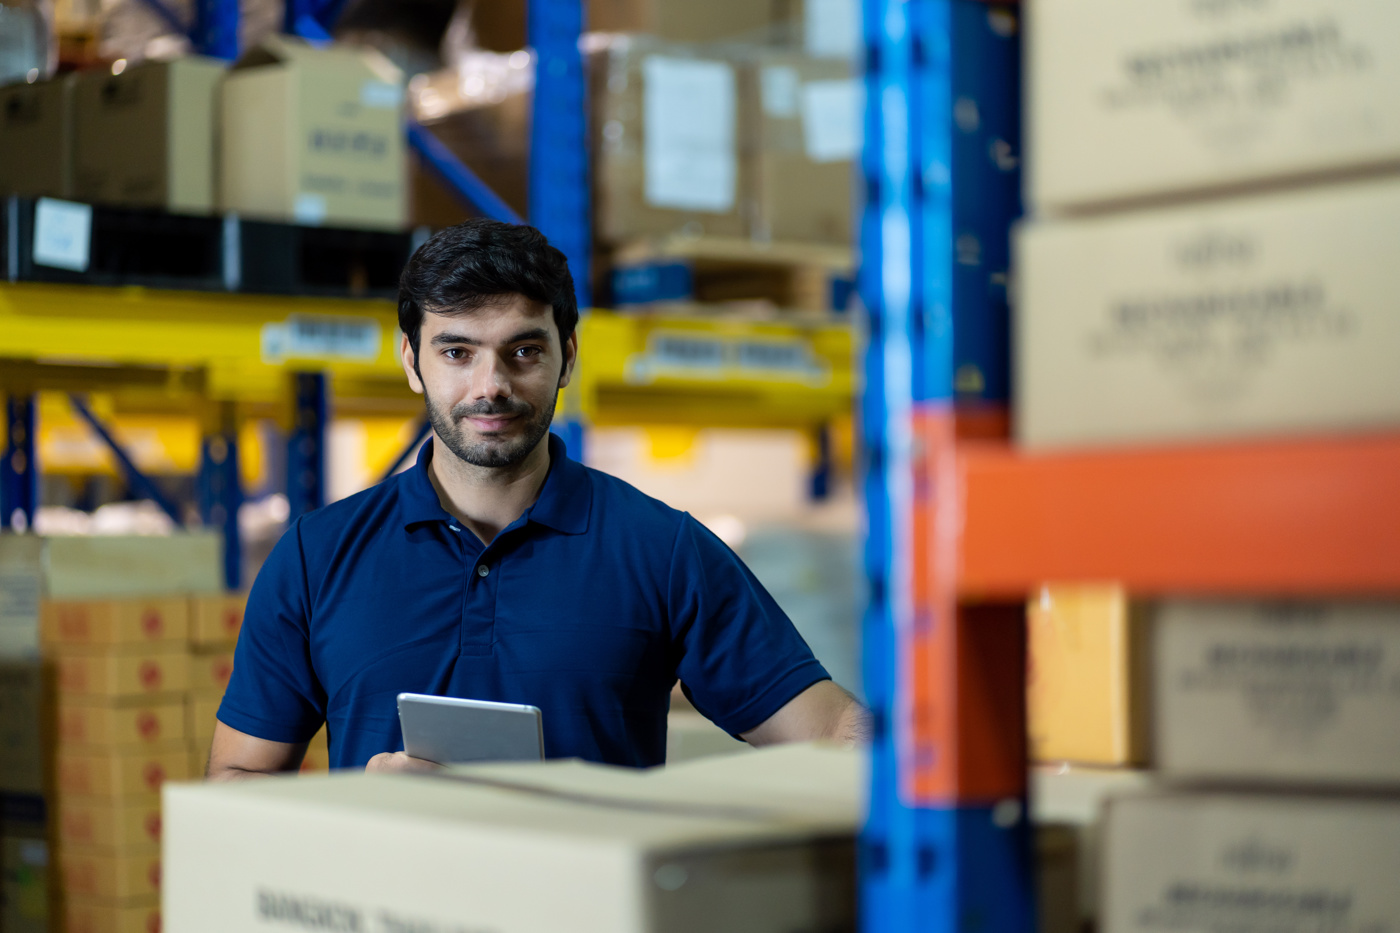 A logistics specialist with a federal certificate is in the warehouse to find possible optimization measures in the internal logistics processes.